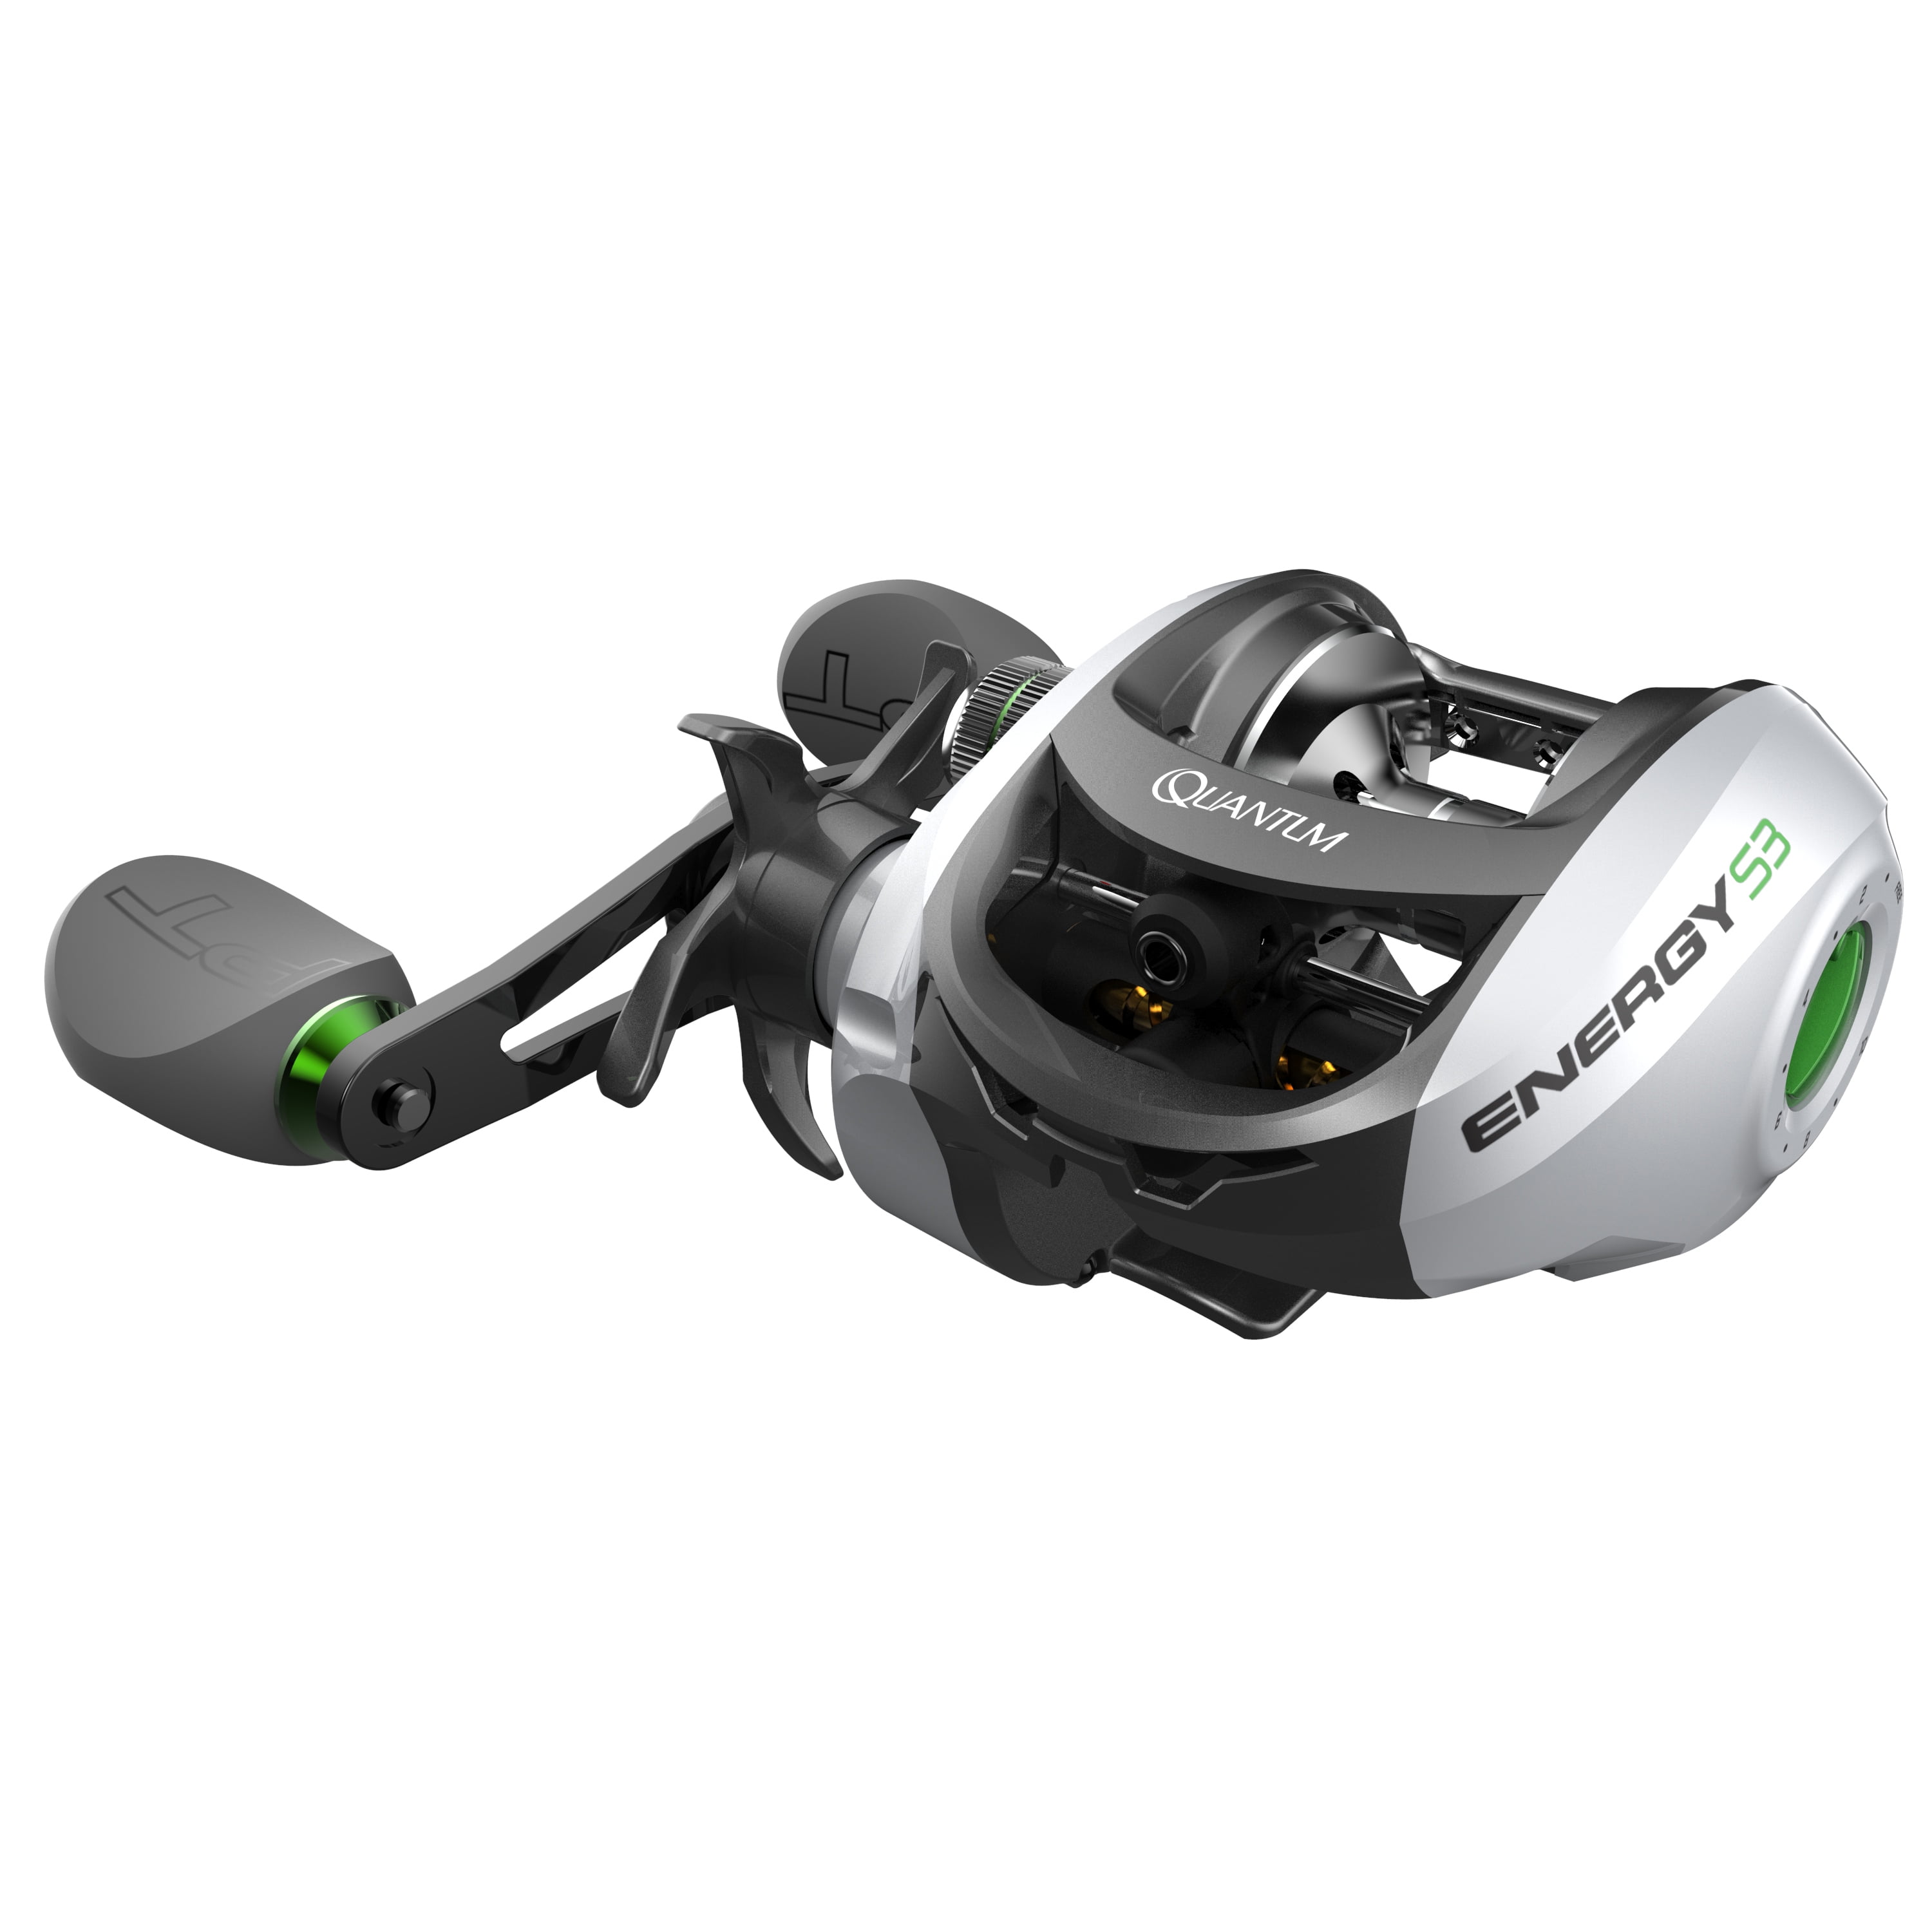 EVA Handle Knobs Continuous Anti-Reverse Clutch Changeable Right- or Left-Hand Retrieve 1 Bearings Quantum Energy S3 Spinning Fishing Reel Silver/Black 8 